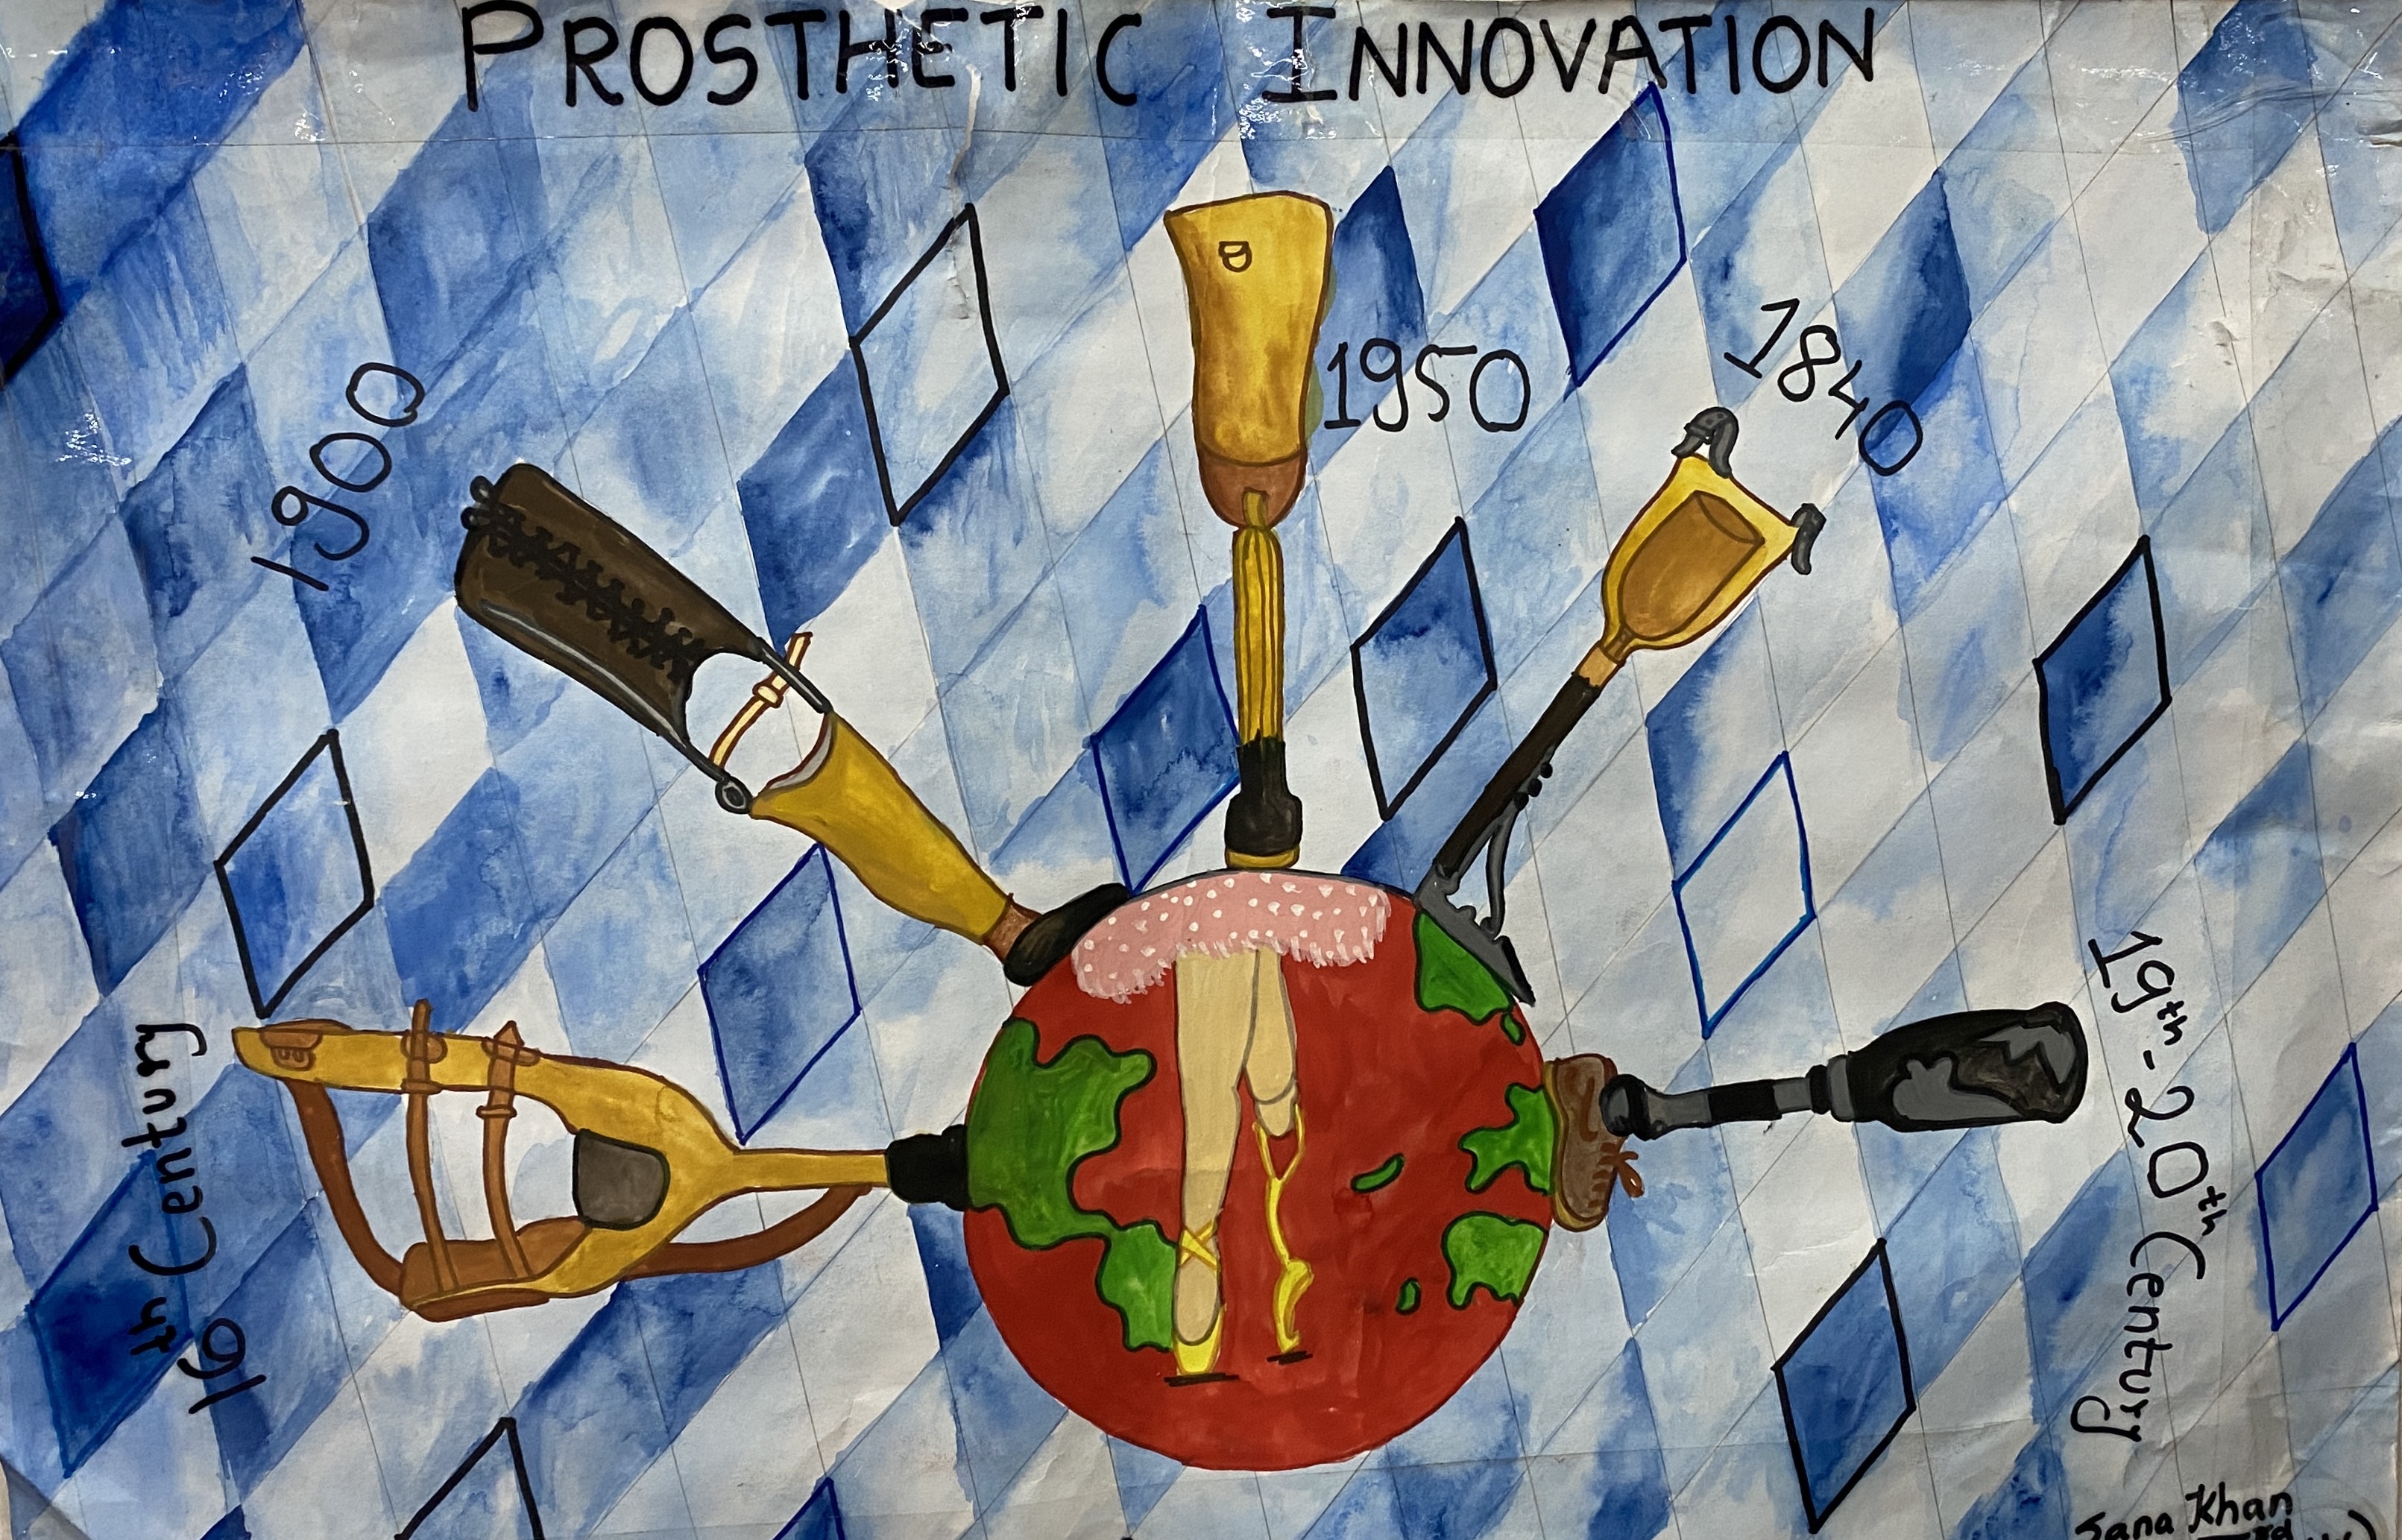 Drawing prepared by Ms. Sana Khan on the occasion of Institution Innovation Day-2019